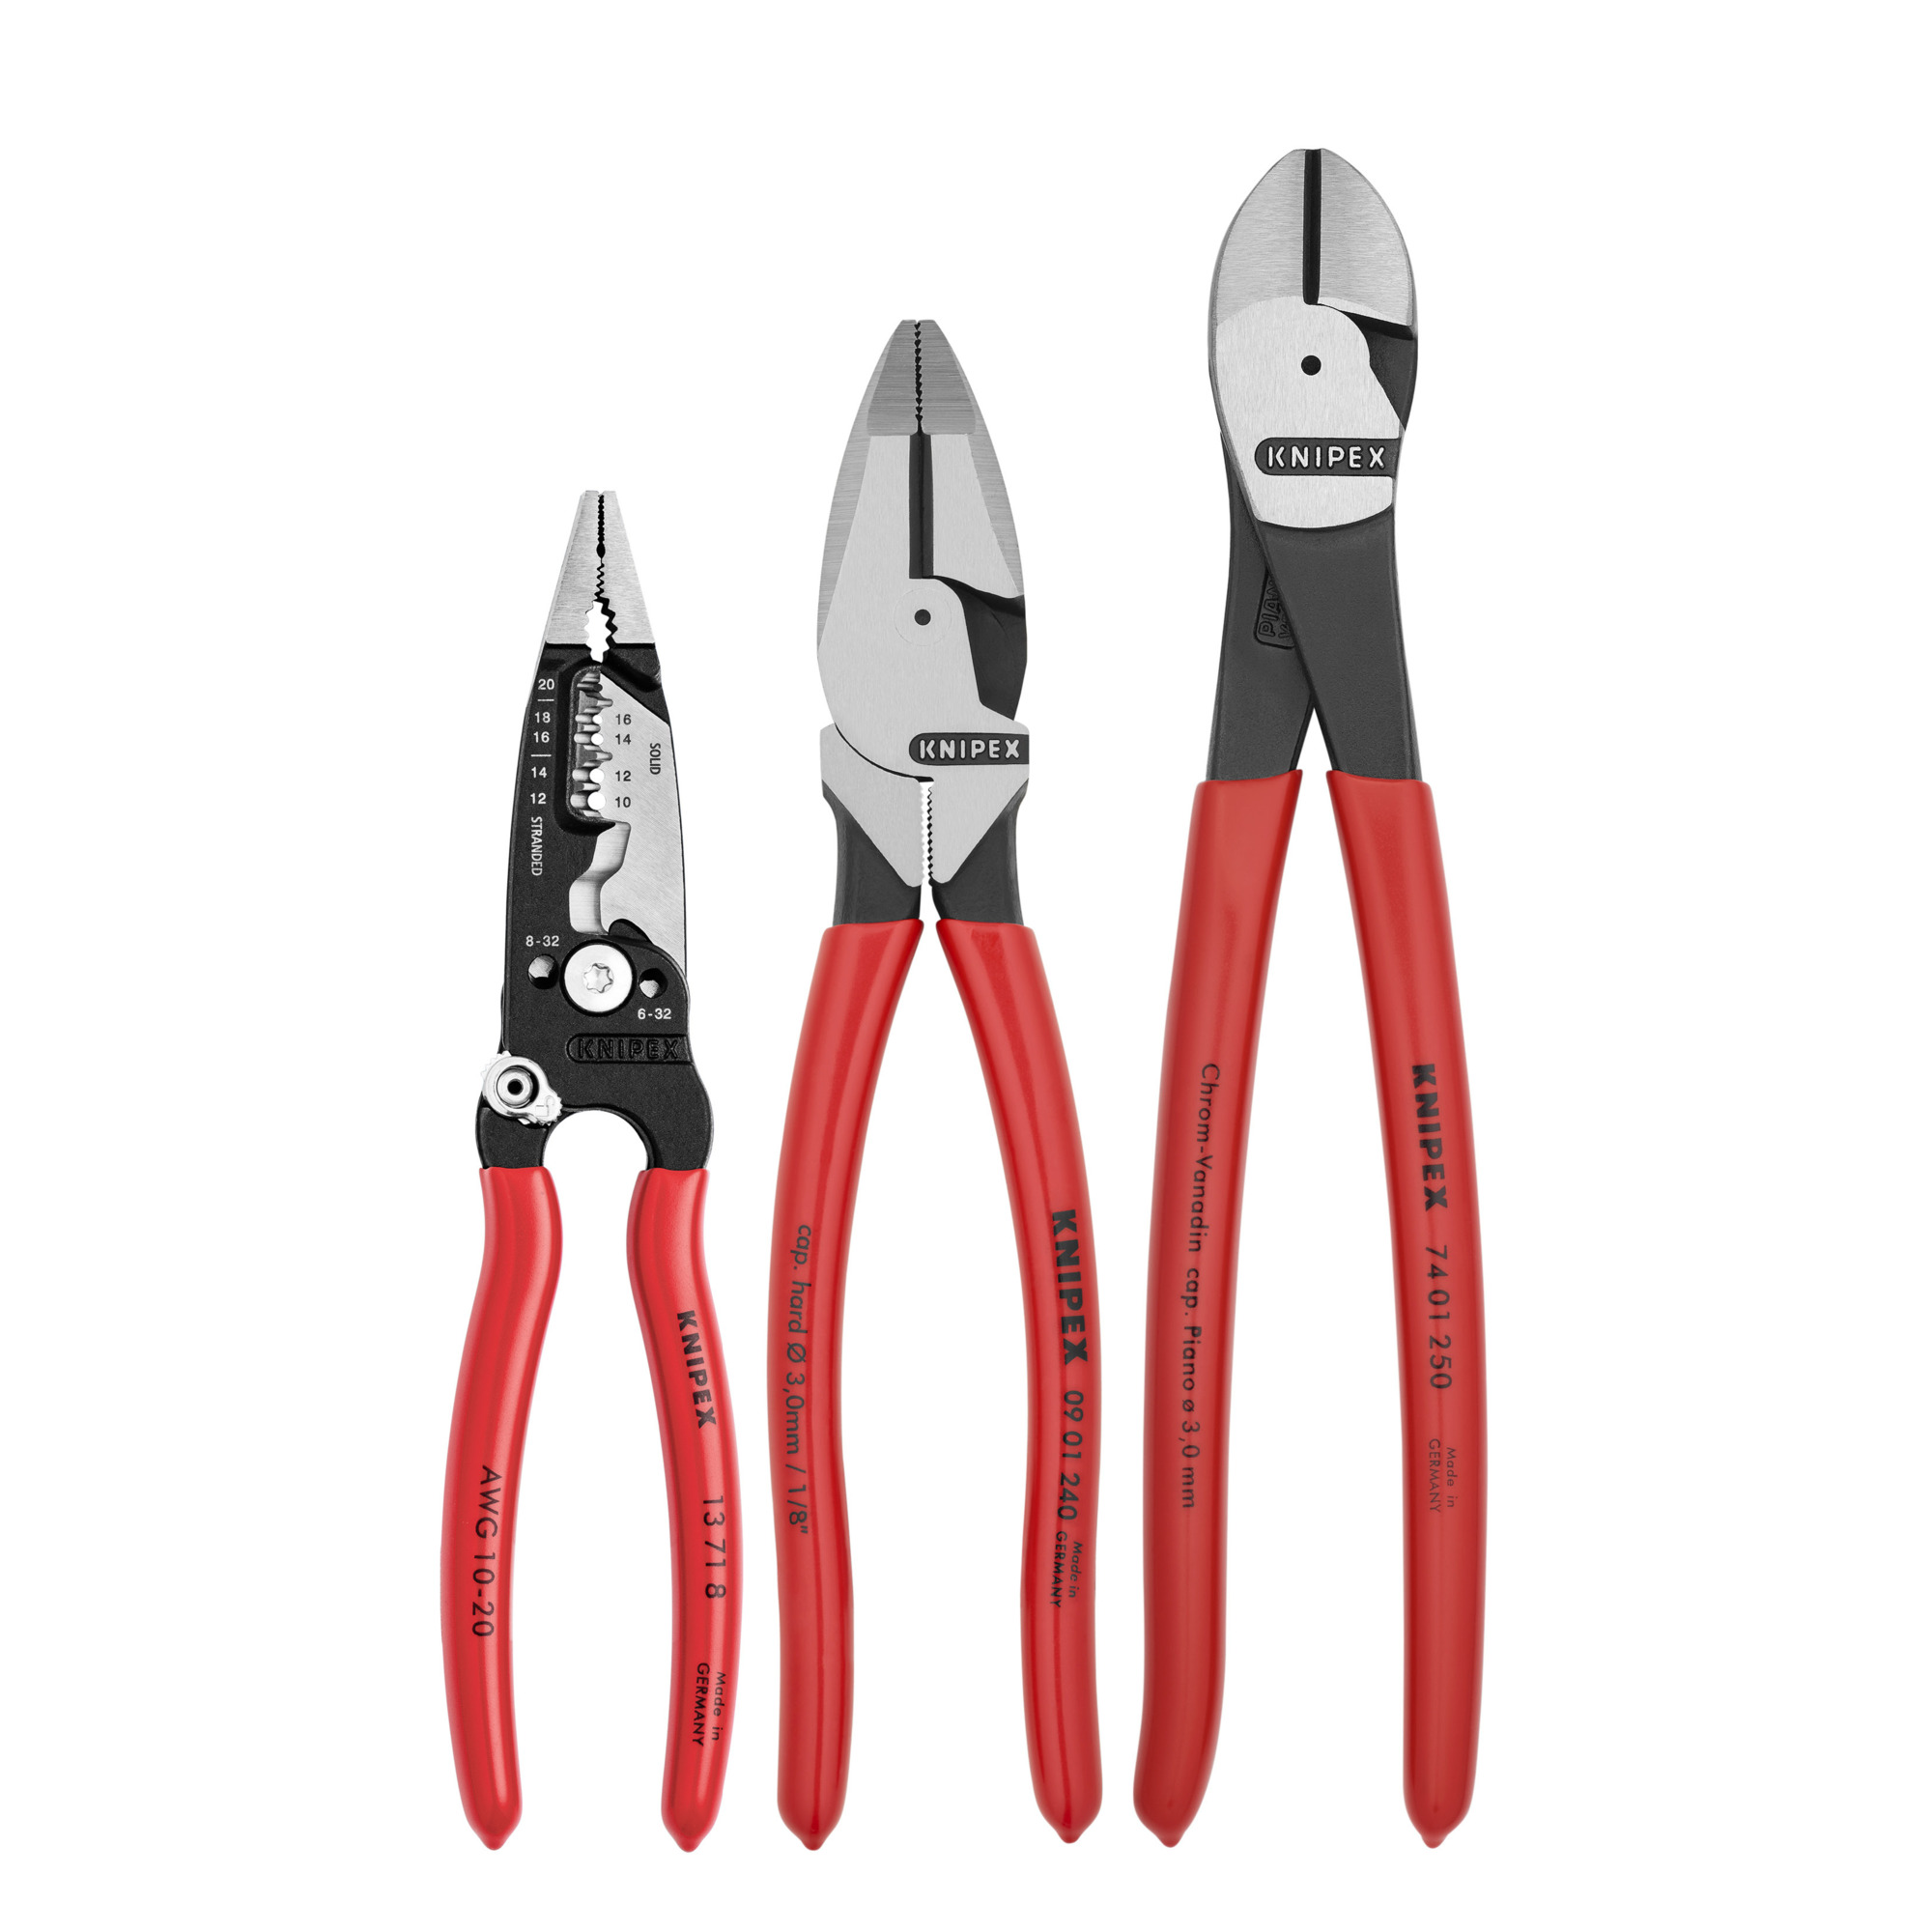 KNIPEX, Electrical Set, No3 Pc, Pieces (qty.) 3 Material Steel, Model 9K 00 80 158 US